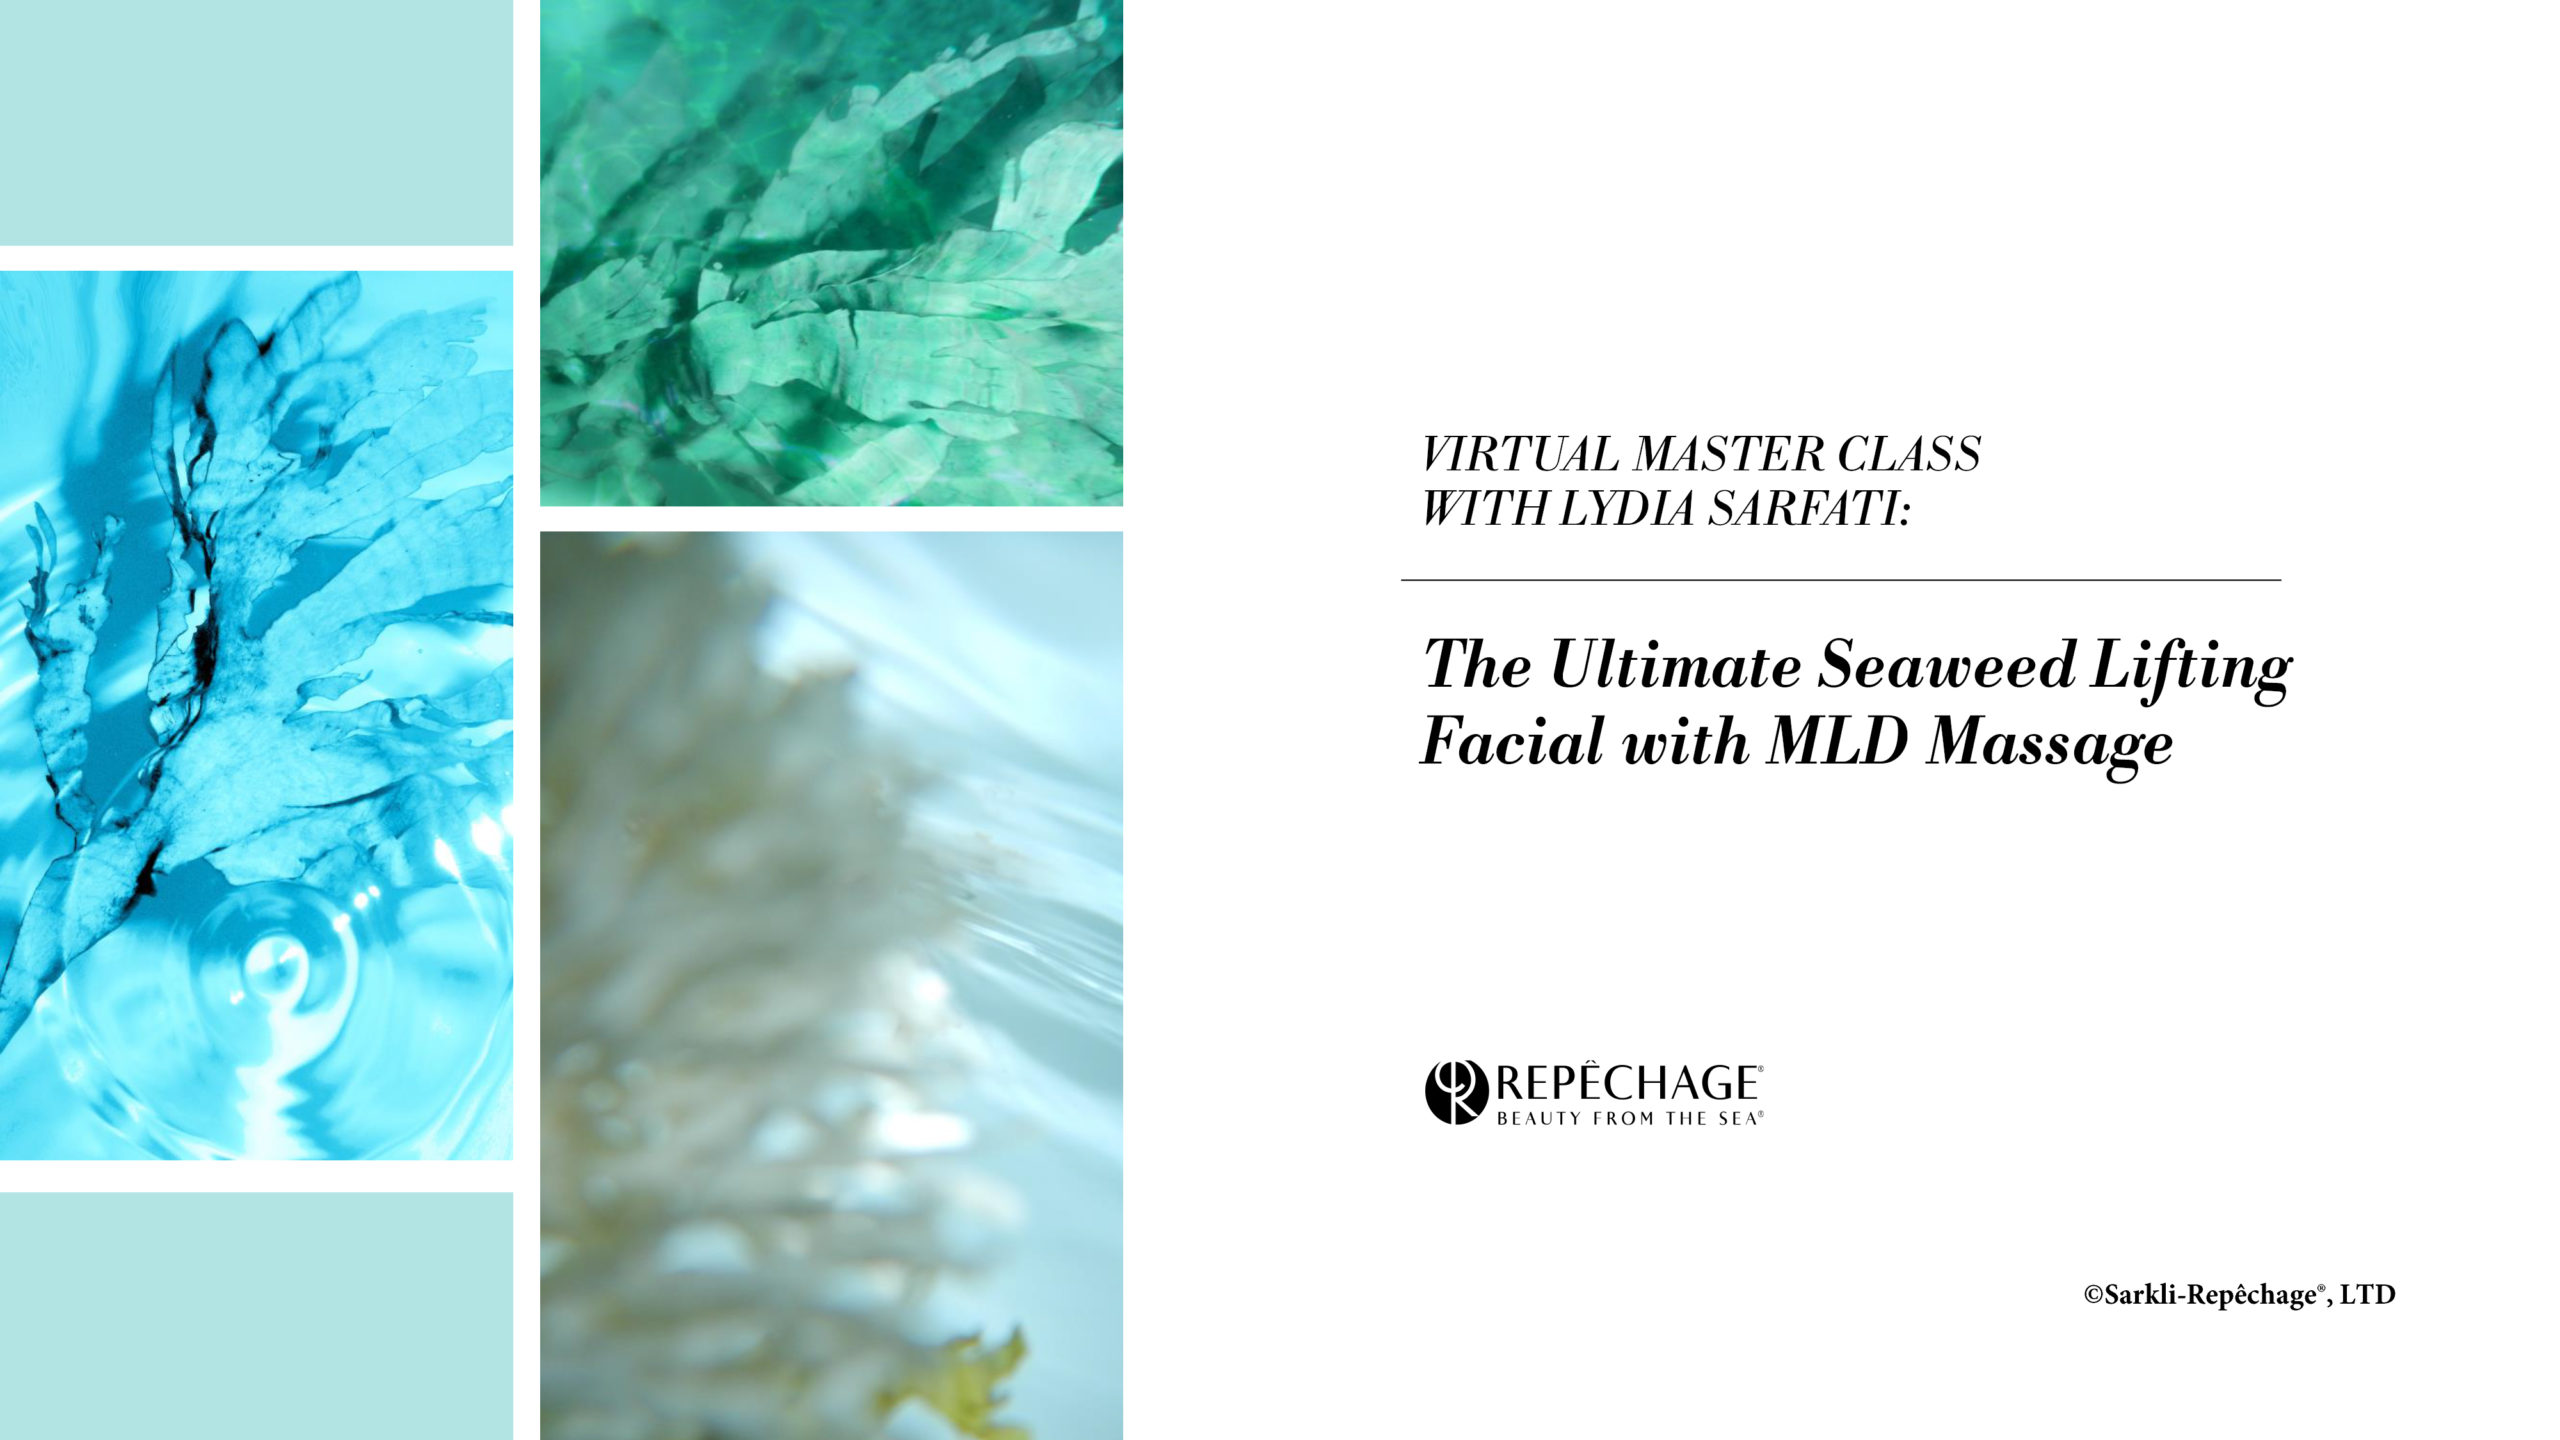 The Ultimate Seaweed Lifting Facial with MLD Massage